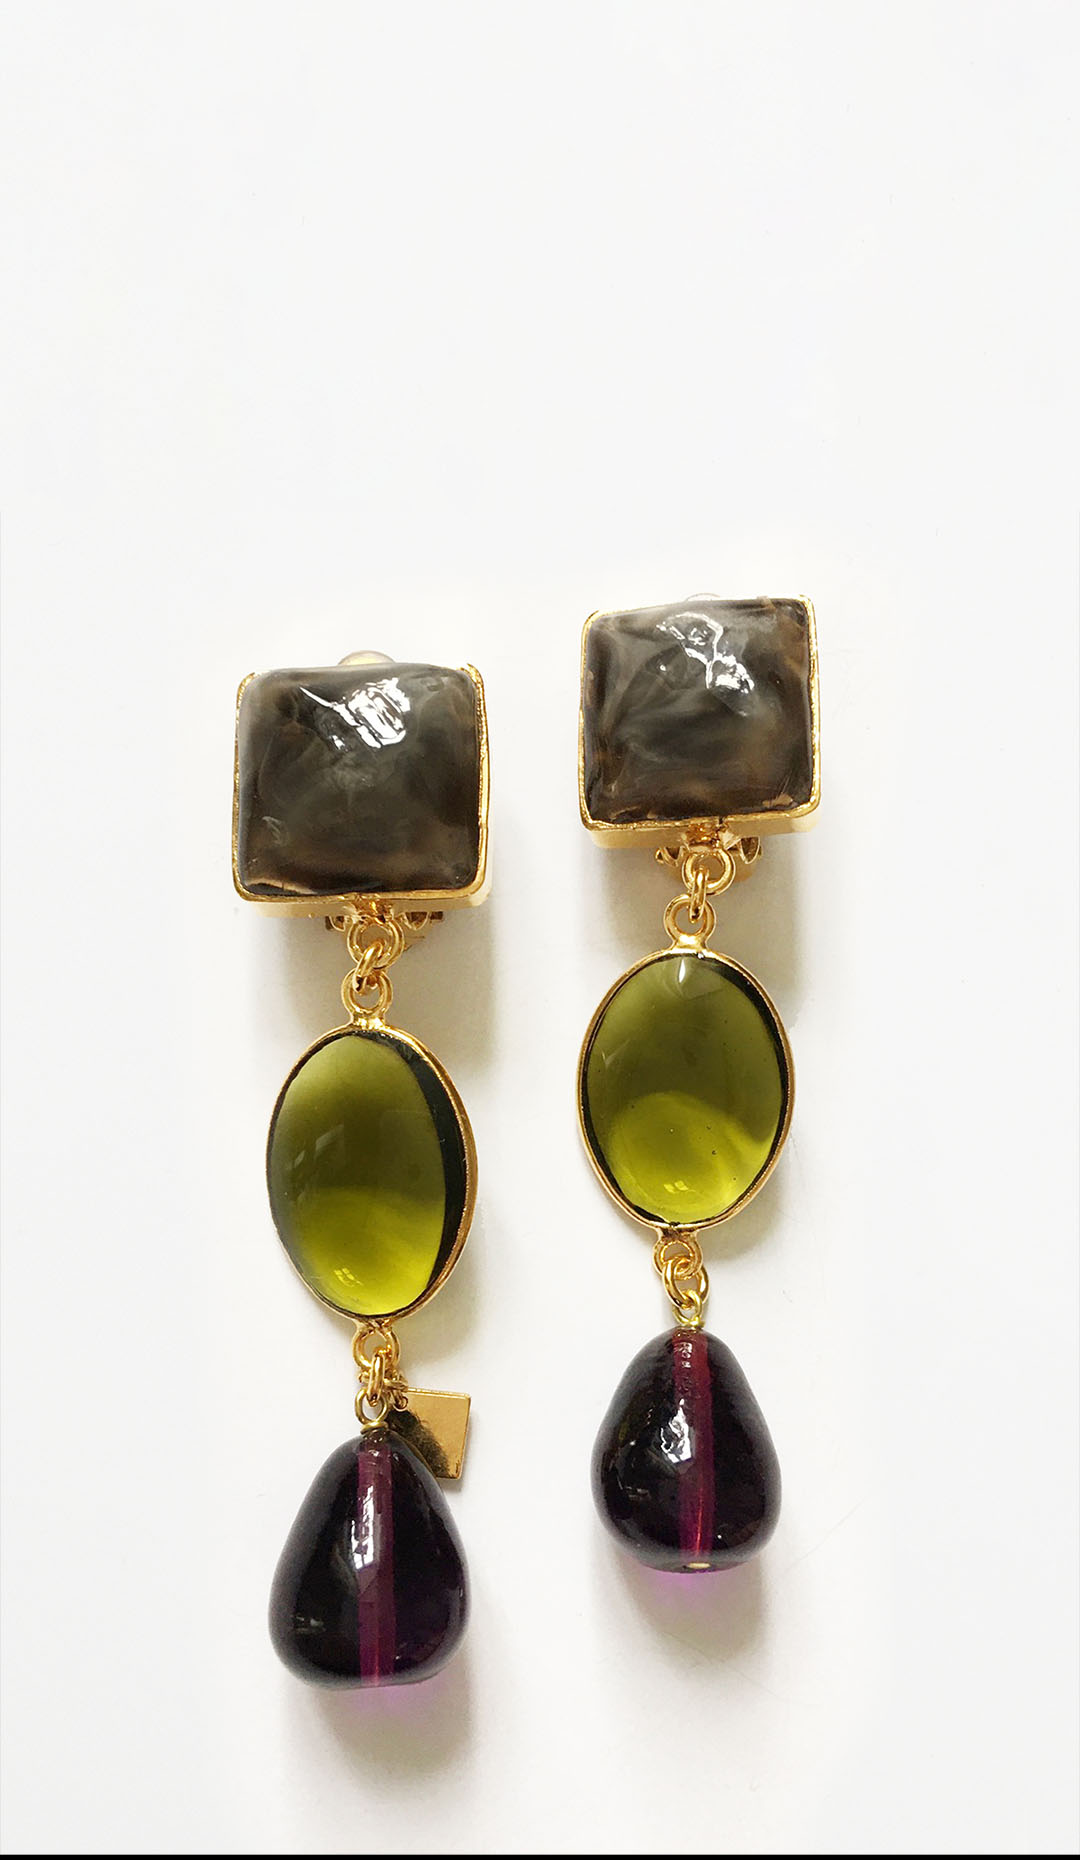 Pave Pebble and Drop Clip Earrings Ash/Absinthe/Heather